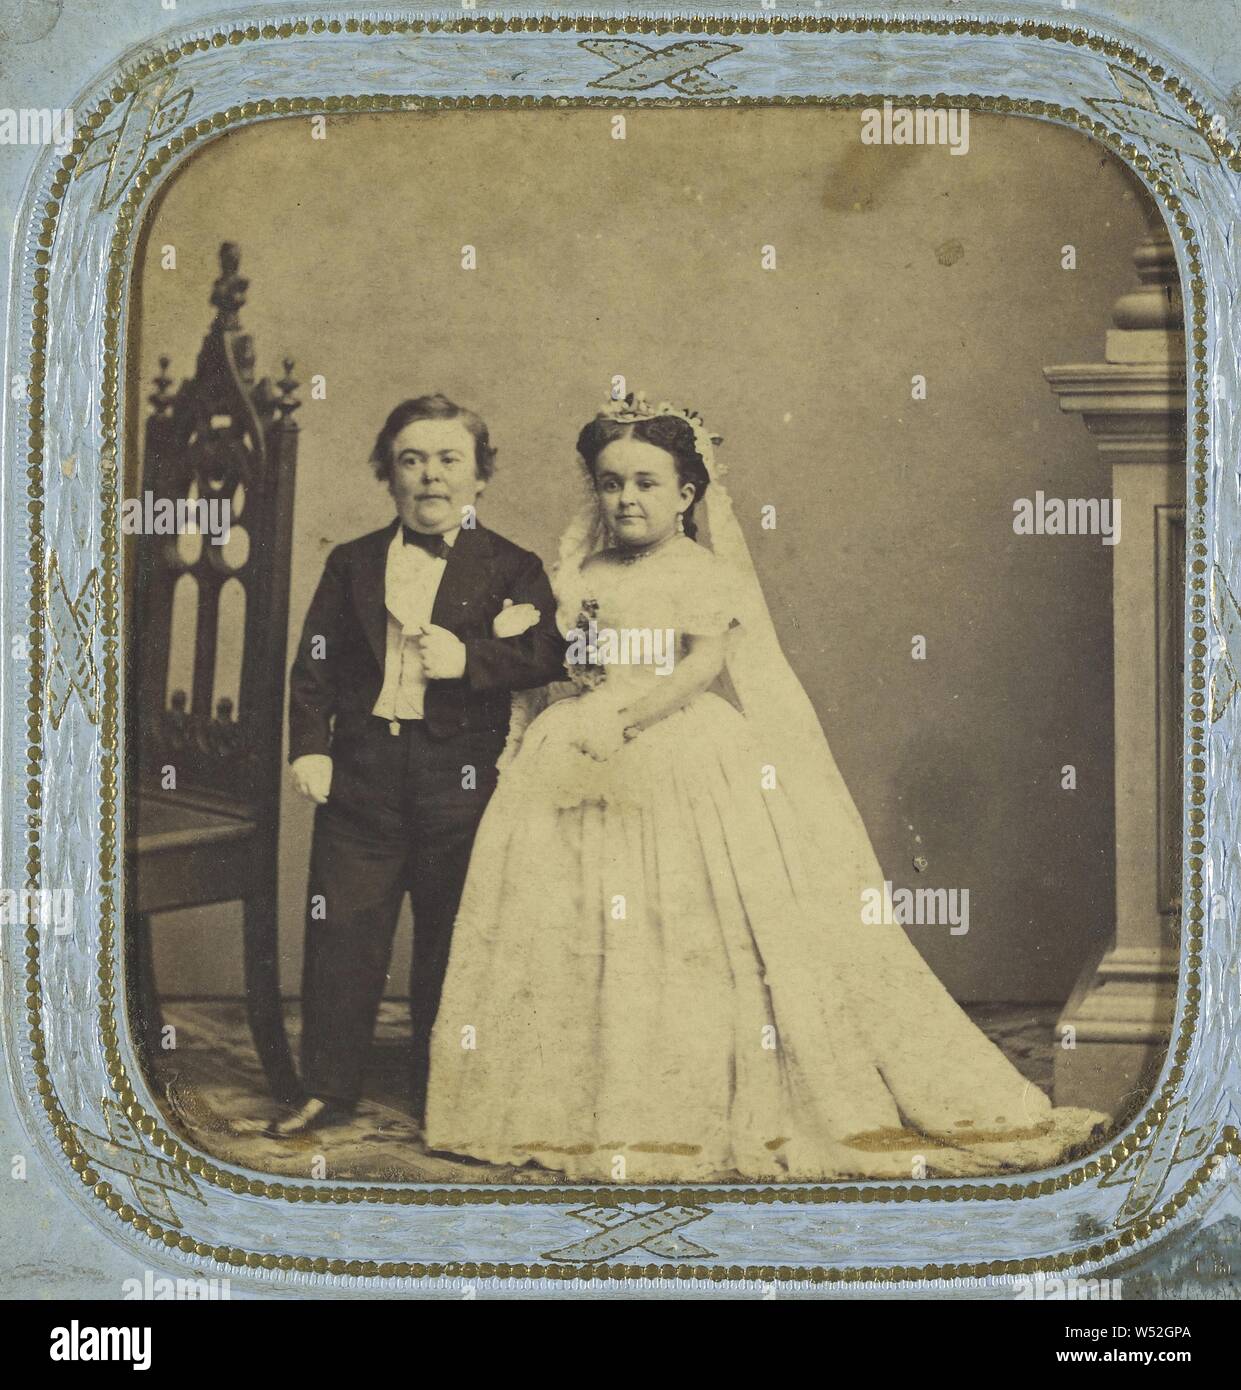 Wedding portrait of General Tom Thumb and Lavinia Warren, Charles Dauvois (French, active 1860s), 1863, Hand-colored albumen silver print Stock Photo